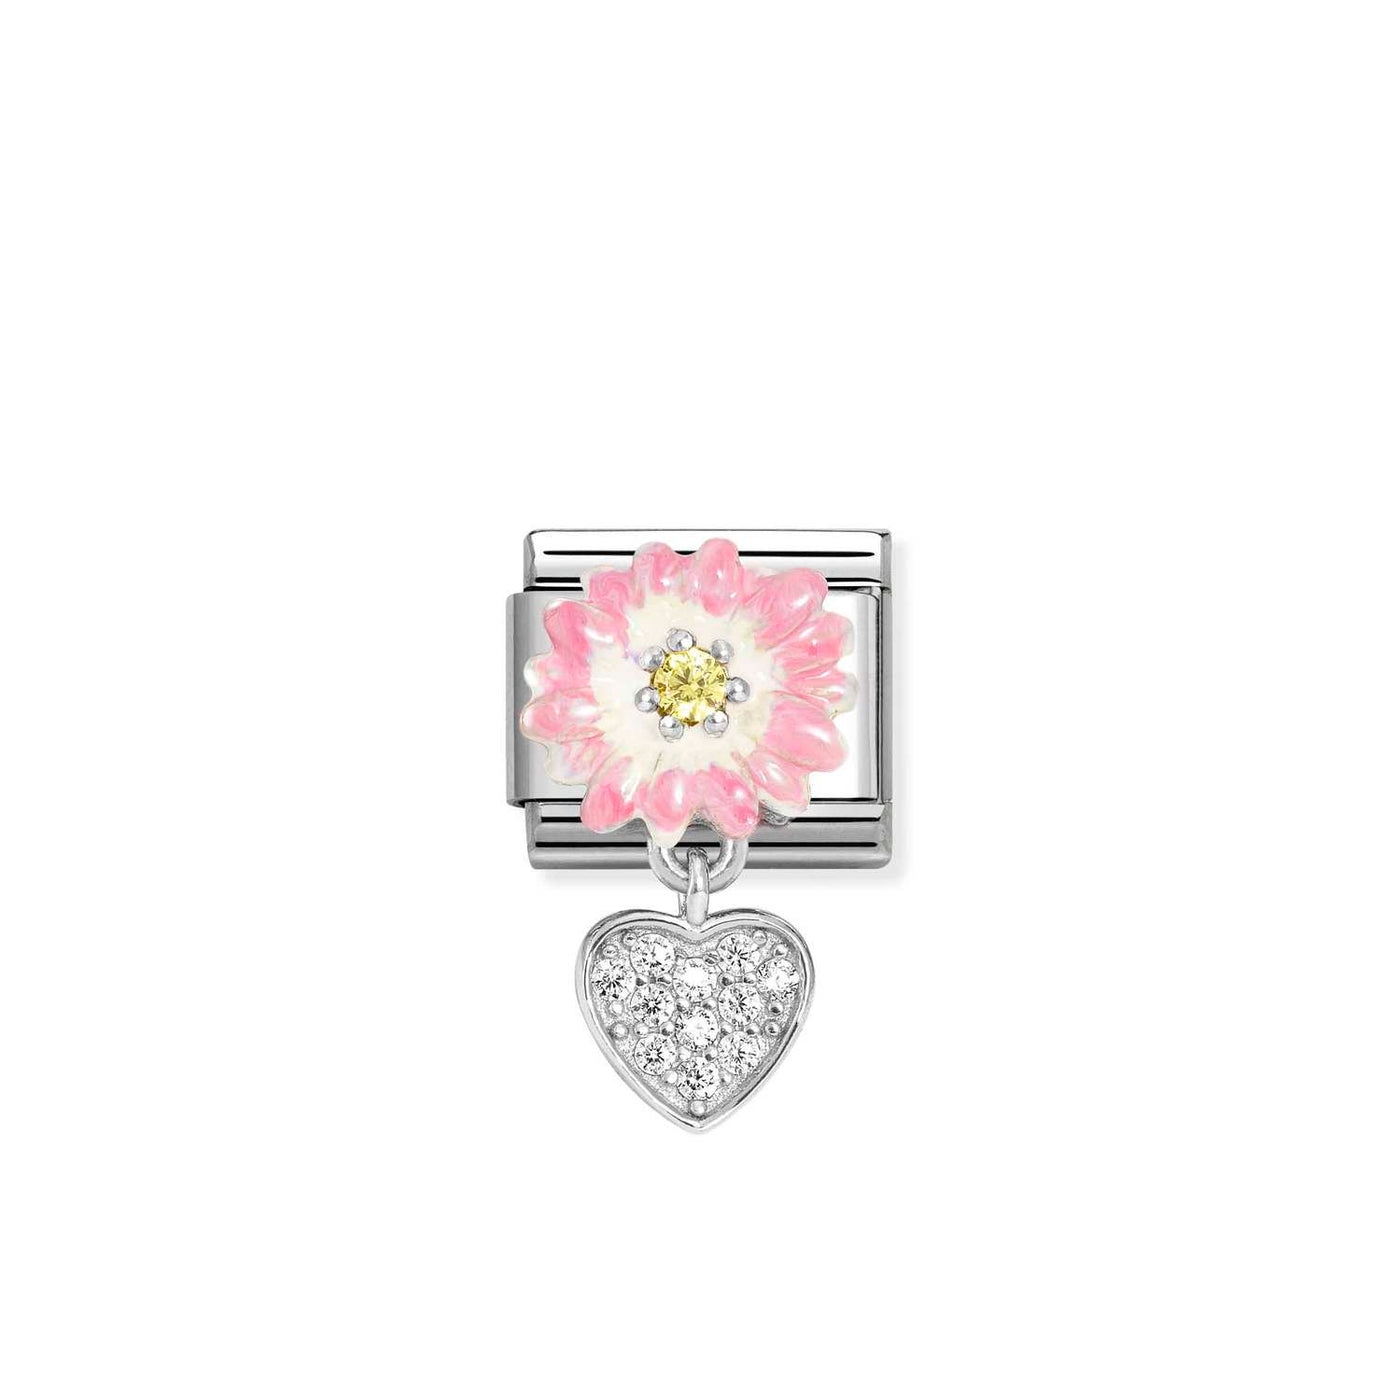 Nomination Classic Silver Cubic Zirconia Pink Daisy Heart Drop Charm